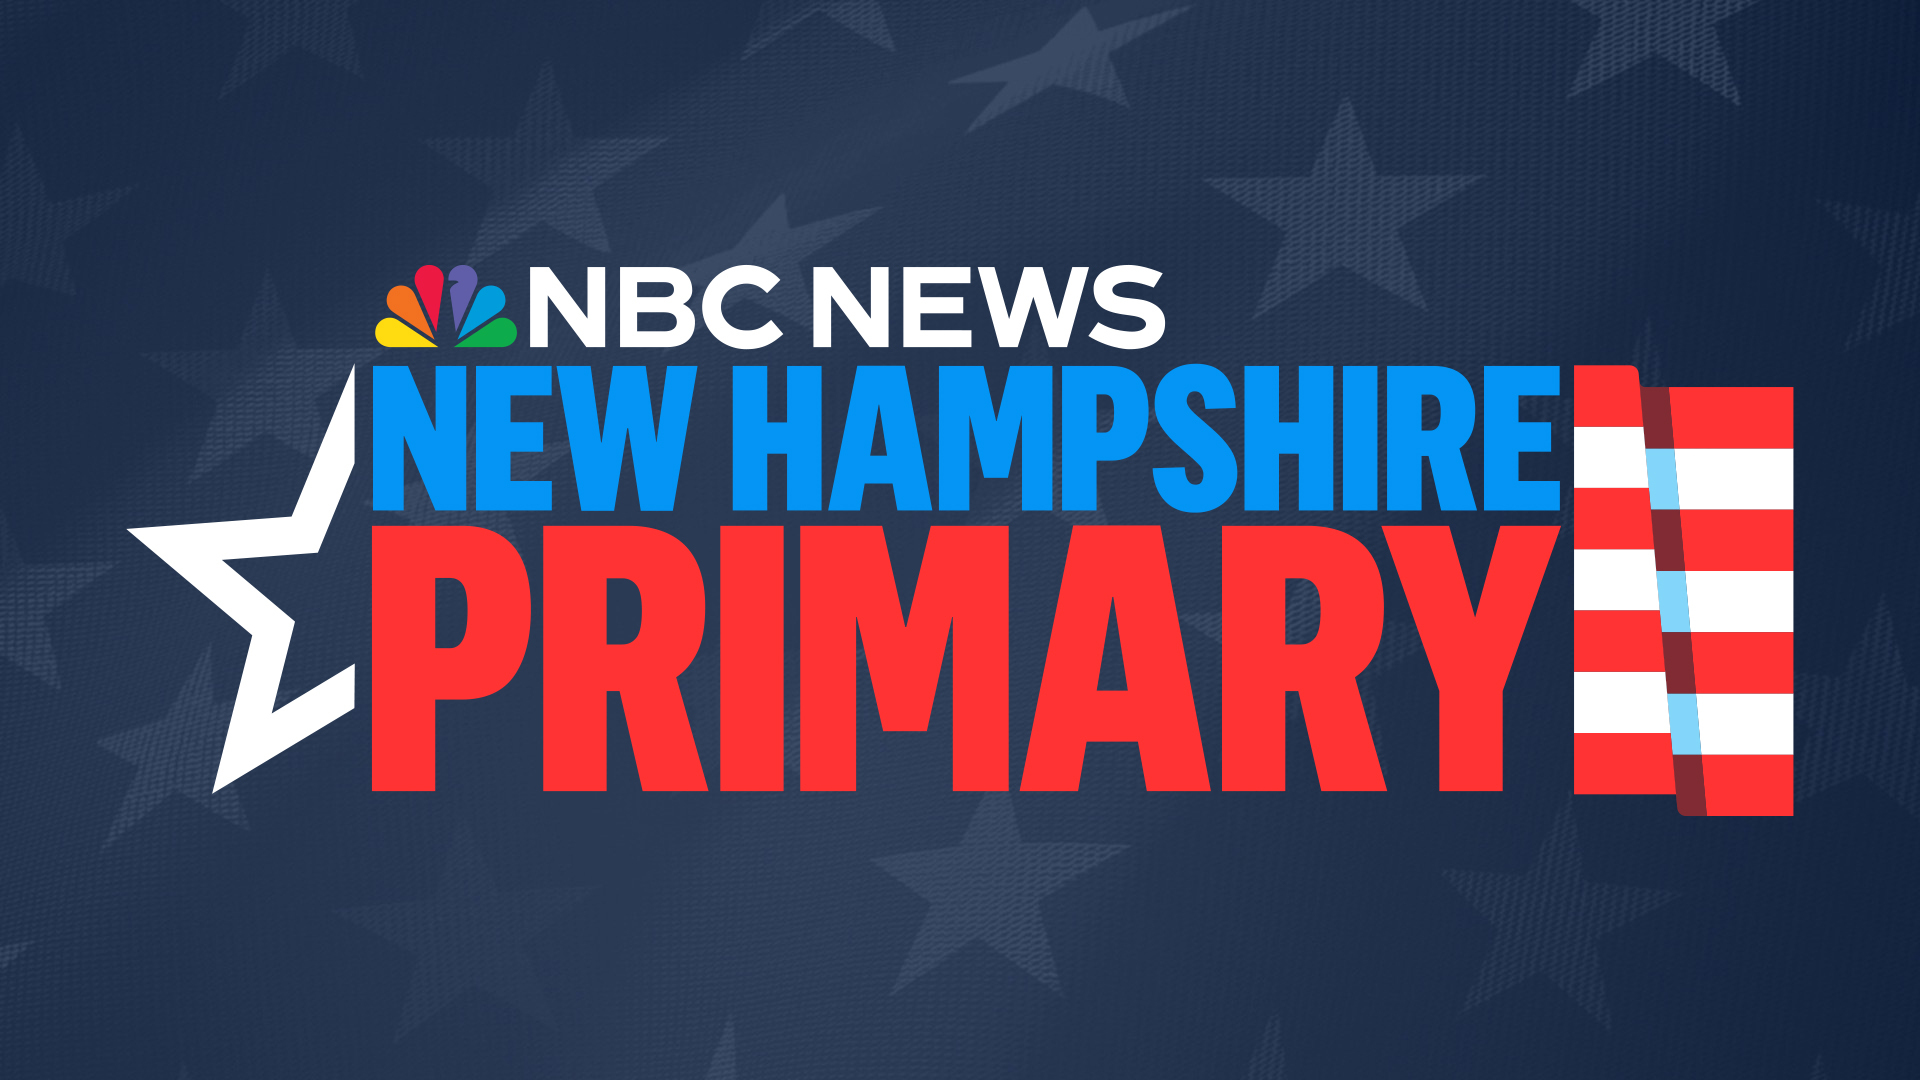 NBC News Continues Comprehensive ‘Decision 2024’ Coverage for First-in-the-Nation New Hampshire Primary